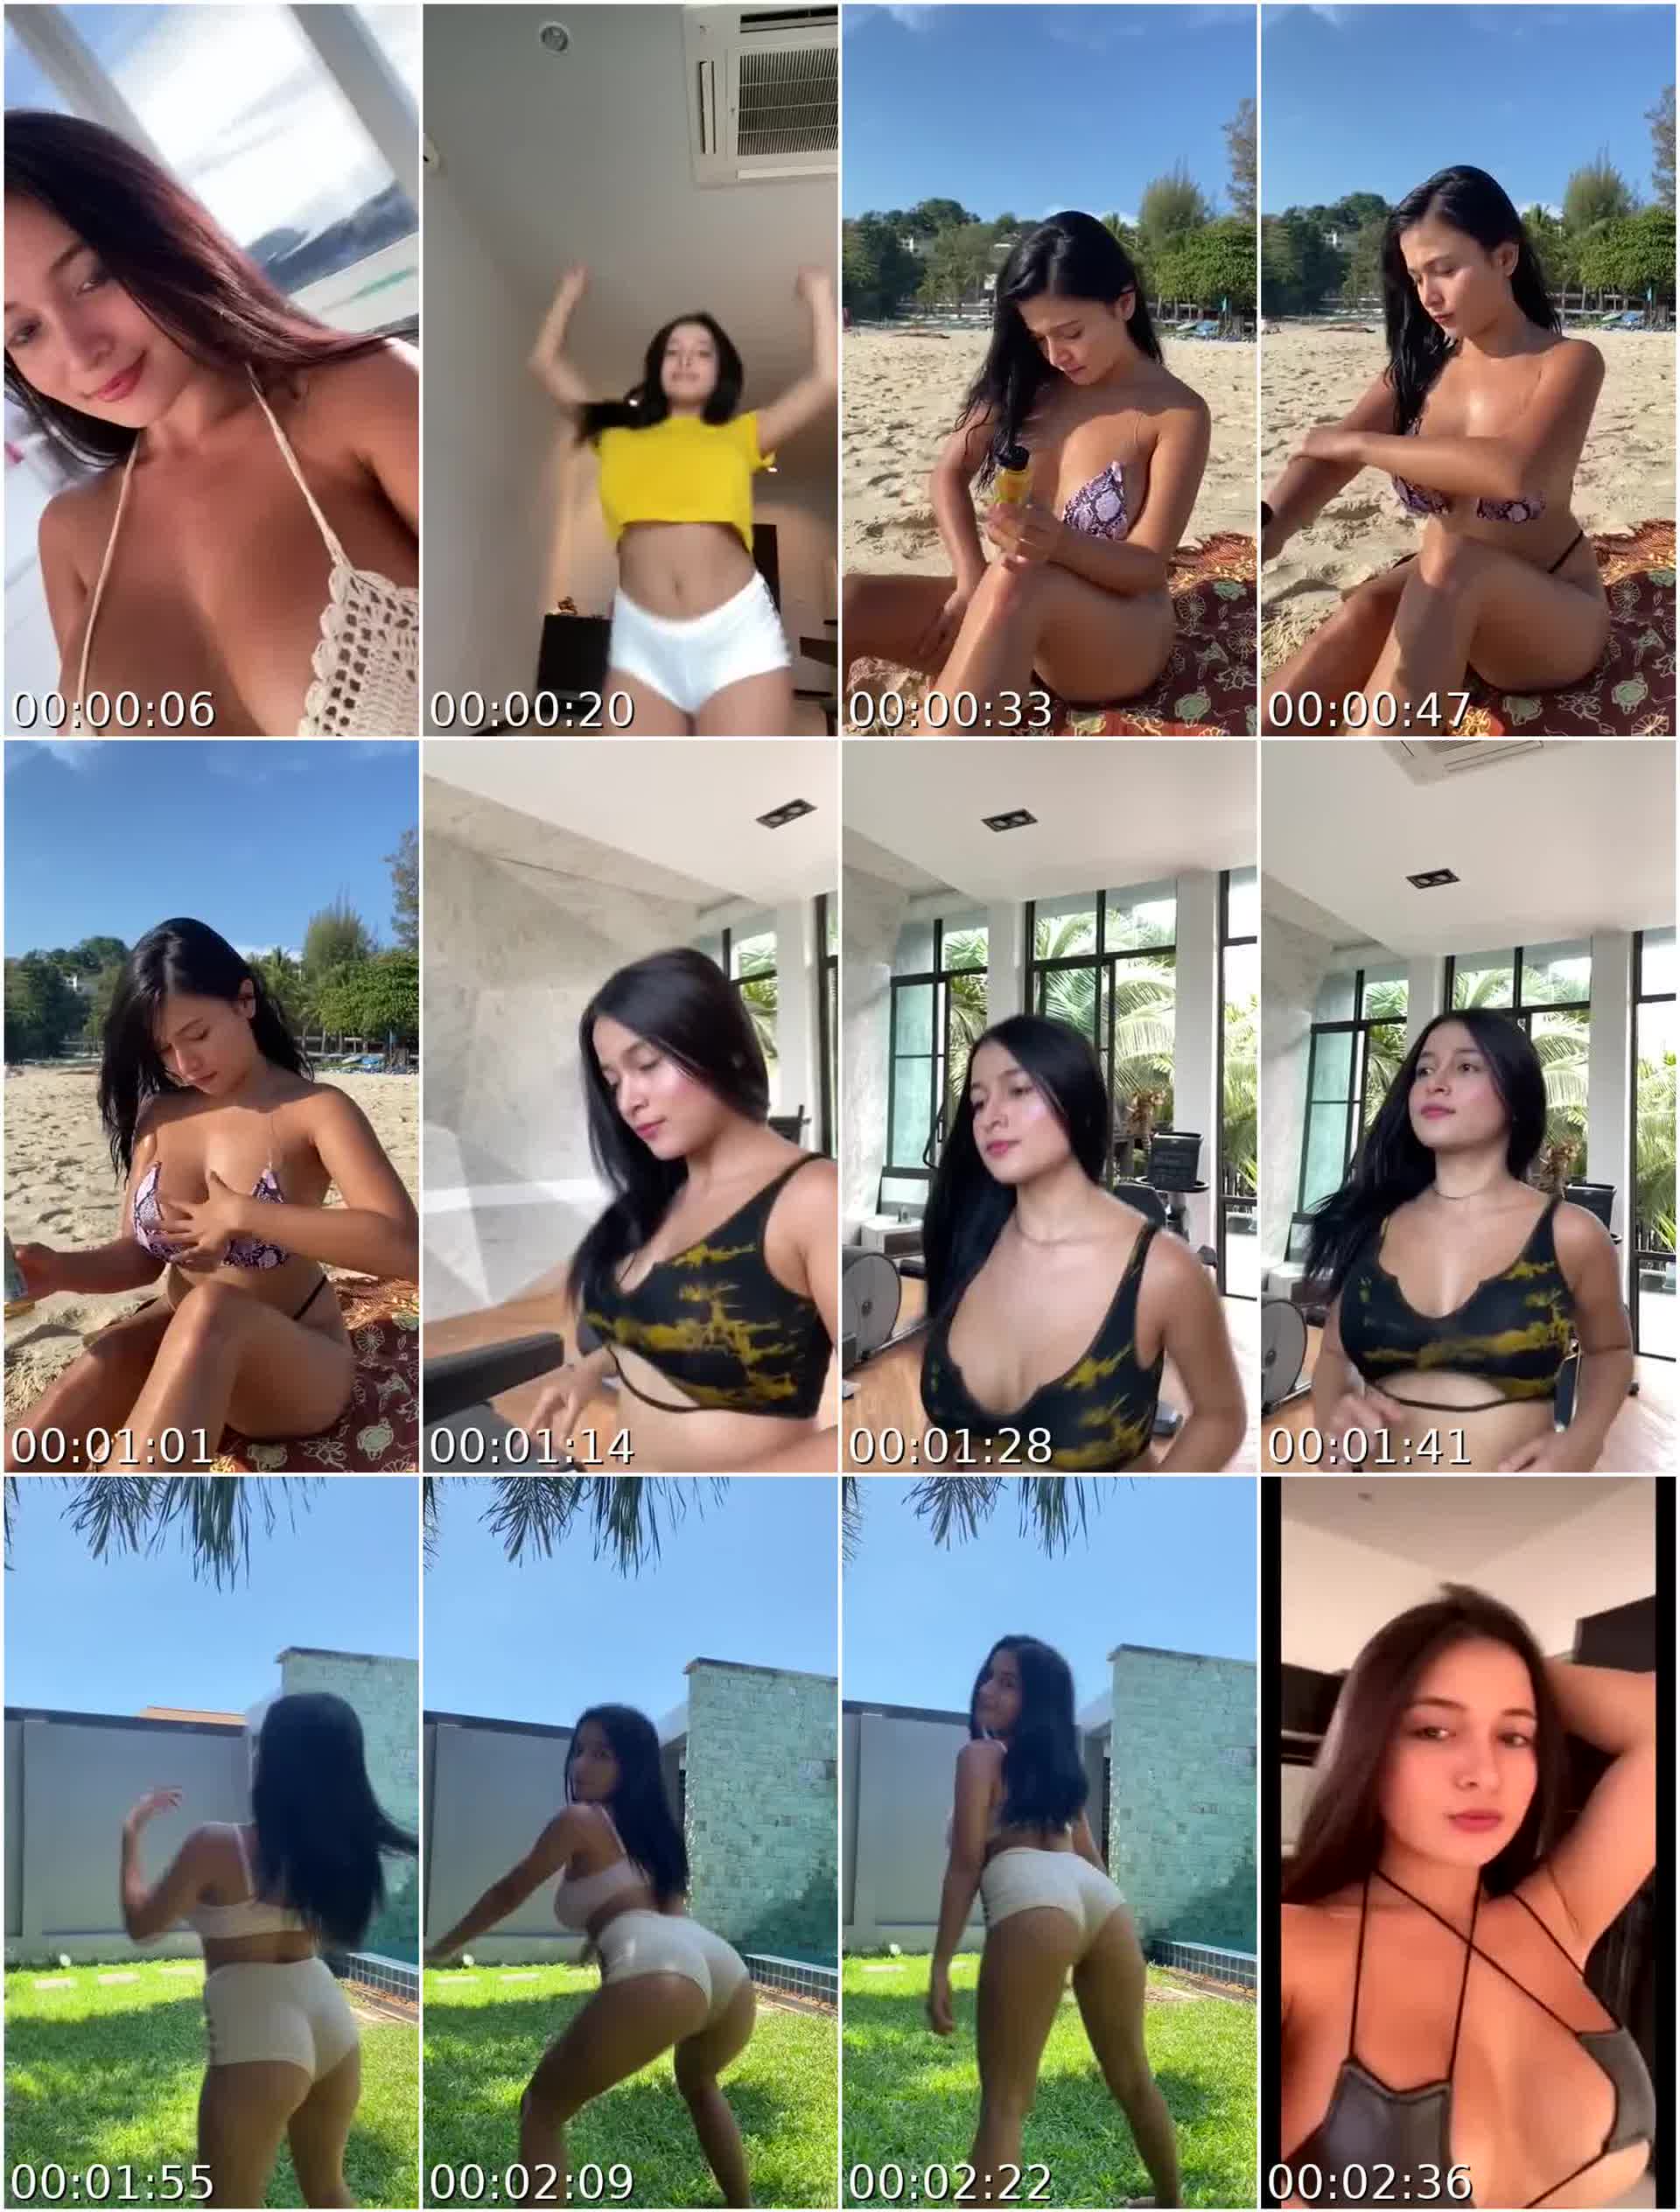 Miss Boobs Compilation Video